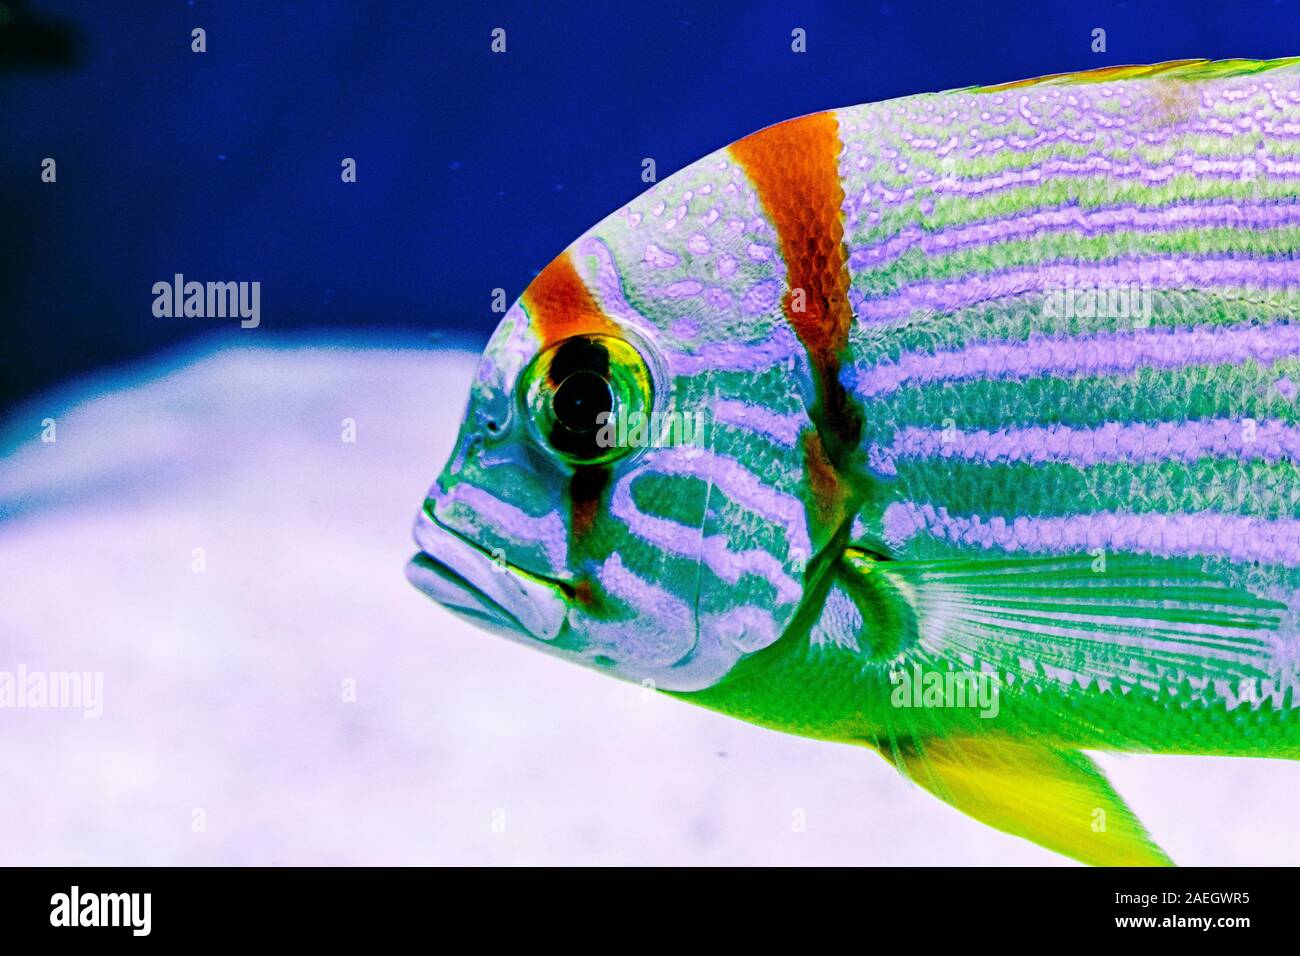 Sailfin snapper (Symphorichthys spilurus), also known as the blue-lined sea bream Stock Photo